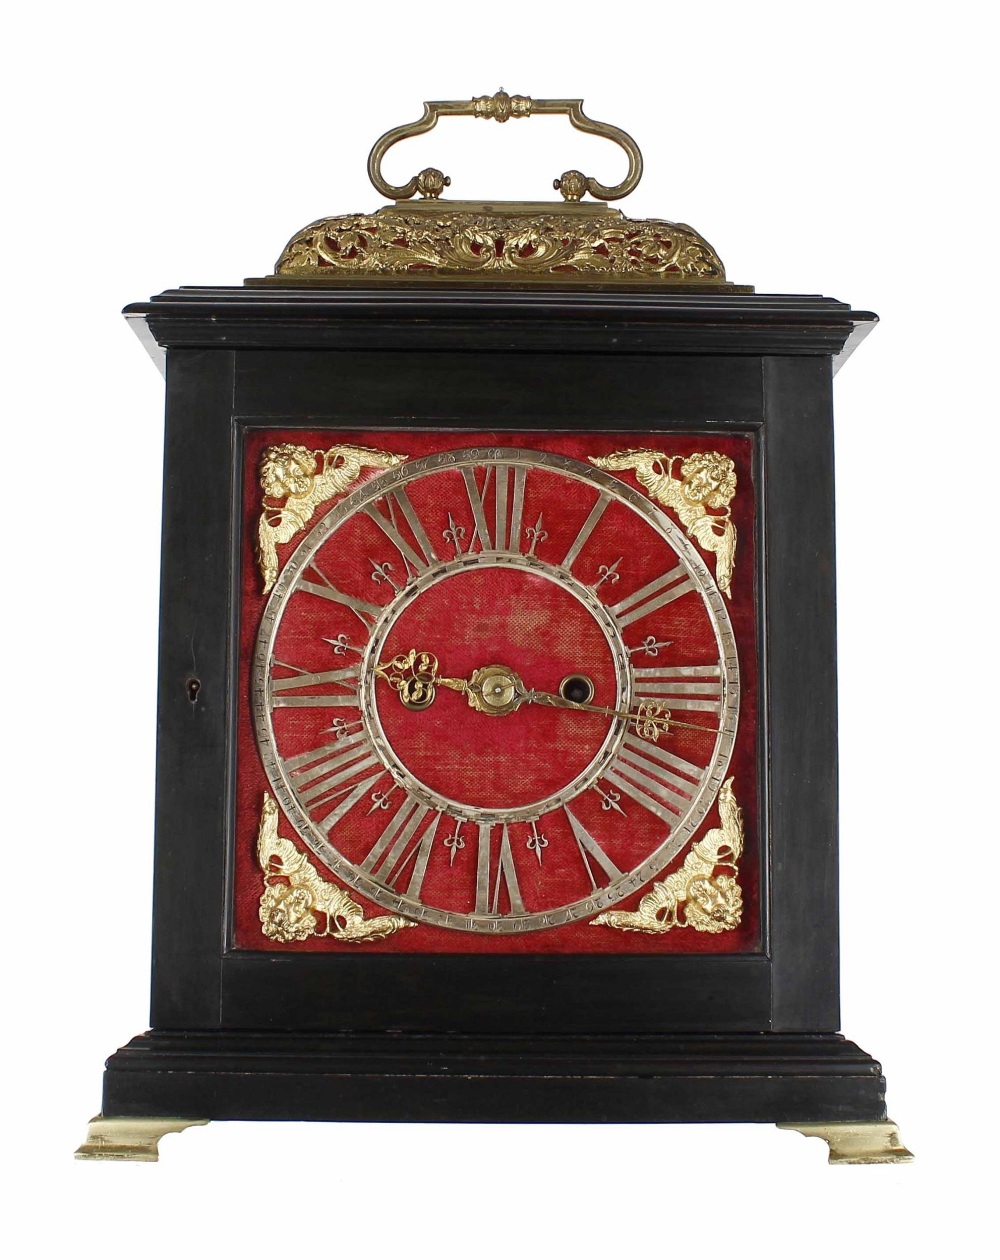 English ebonised double fusee bracket clock, the 7.5" square burgundy velvet clad dial plate with